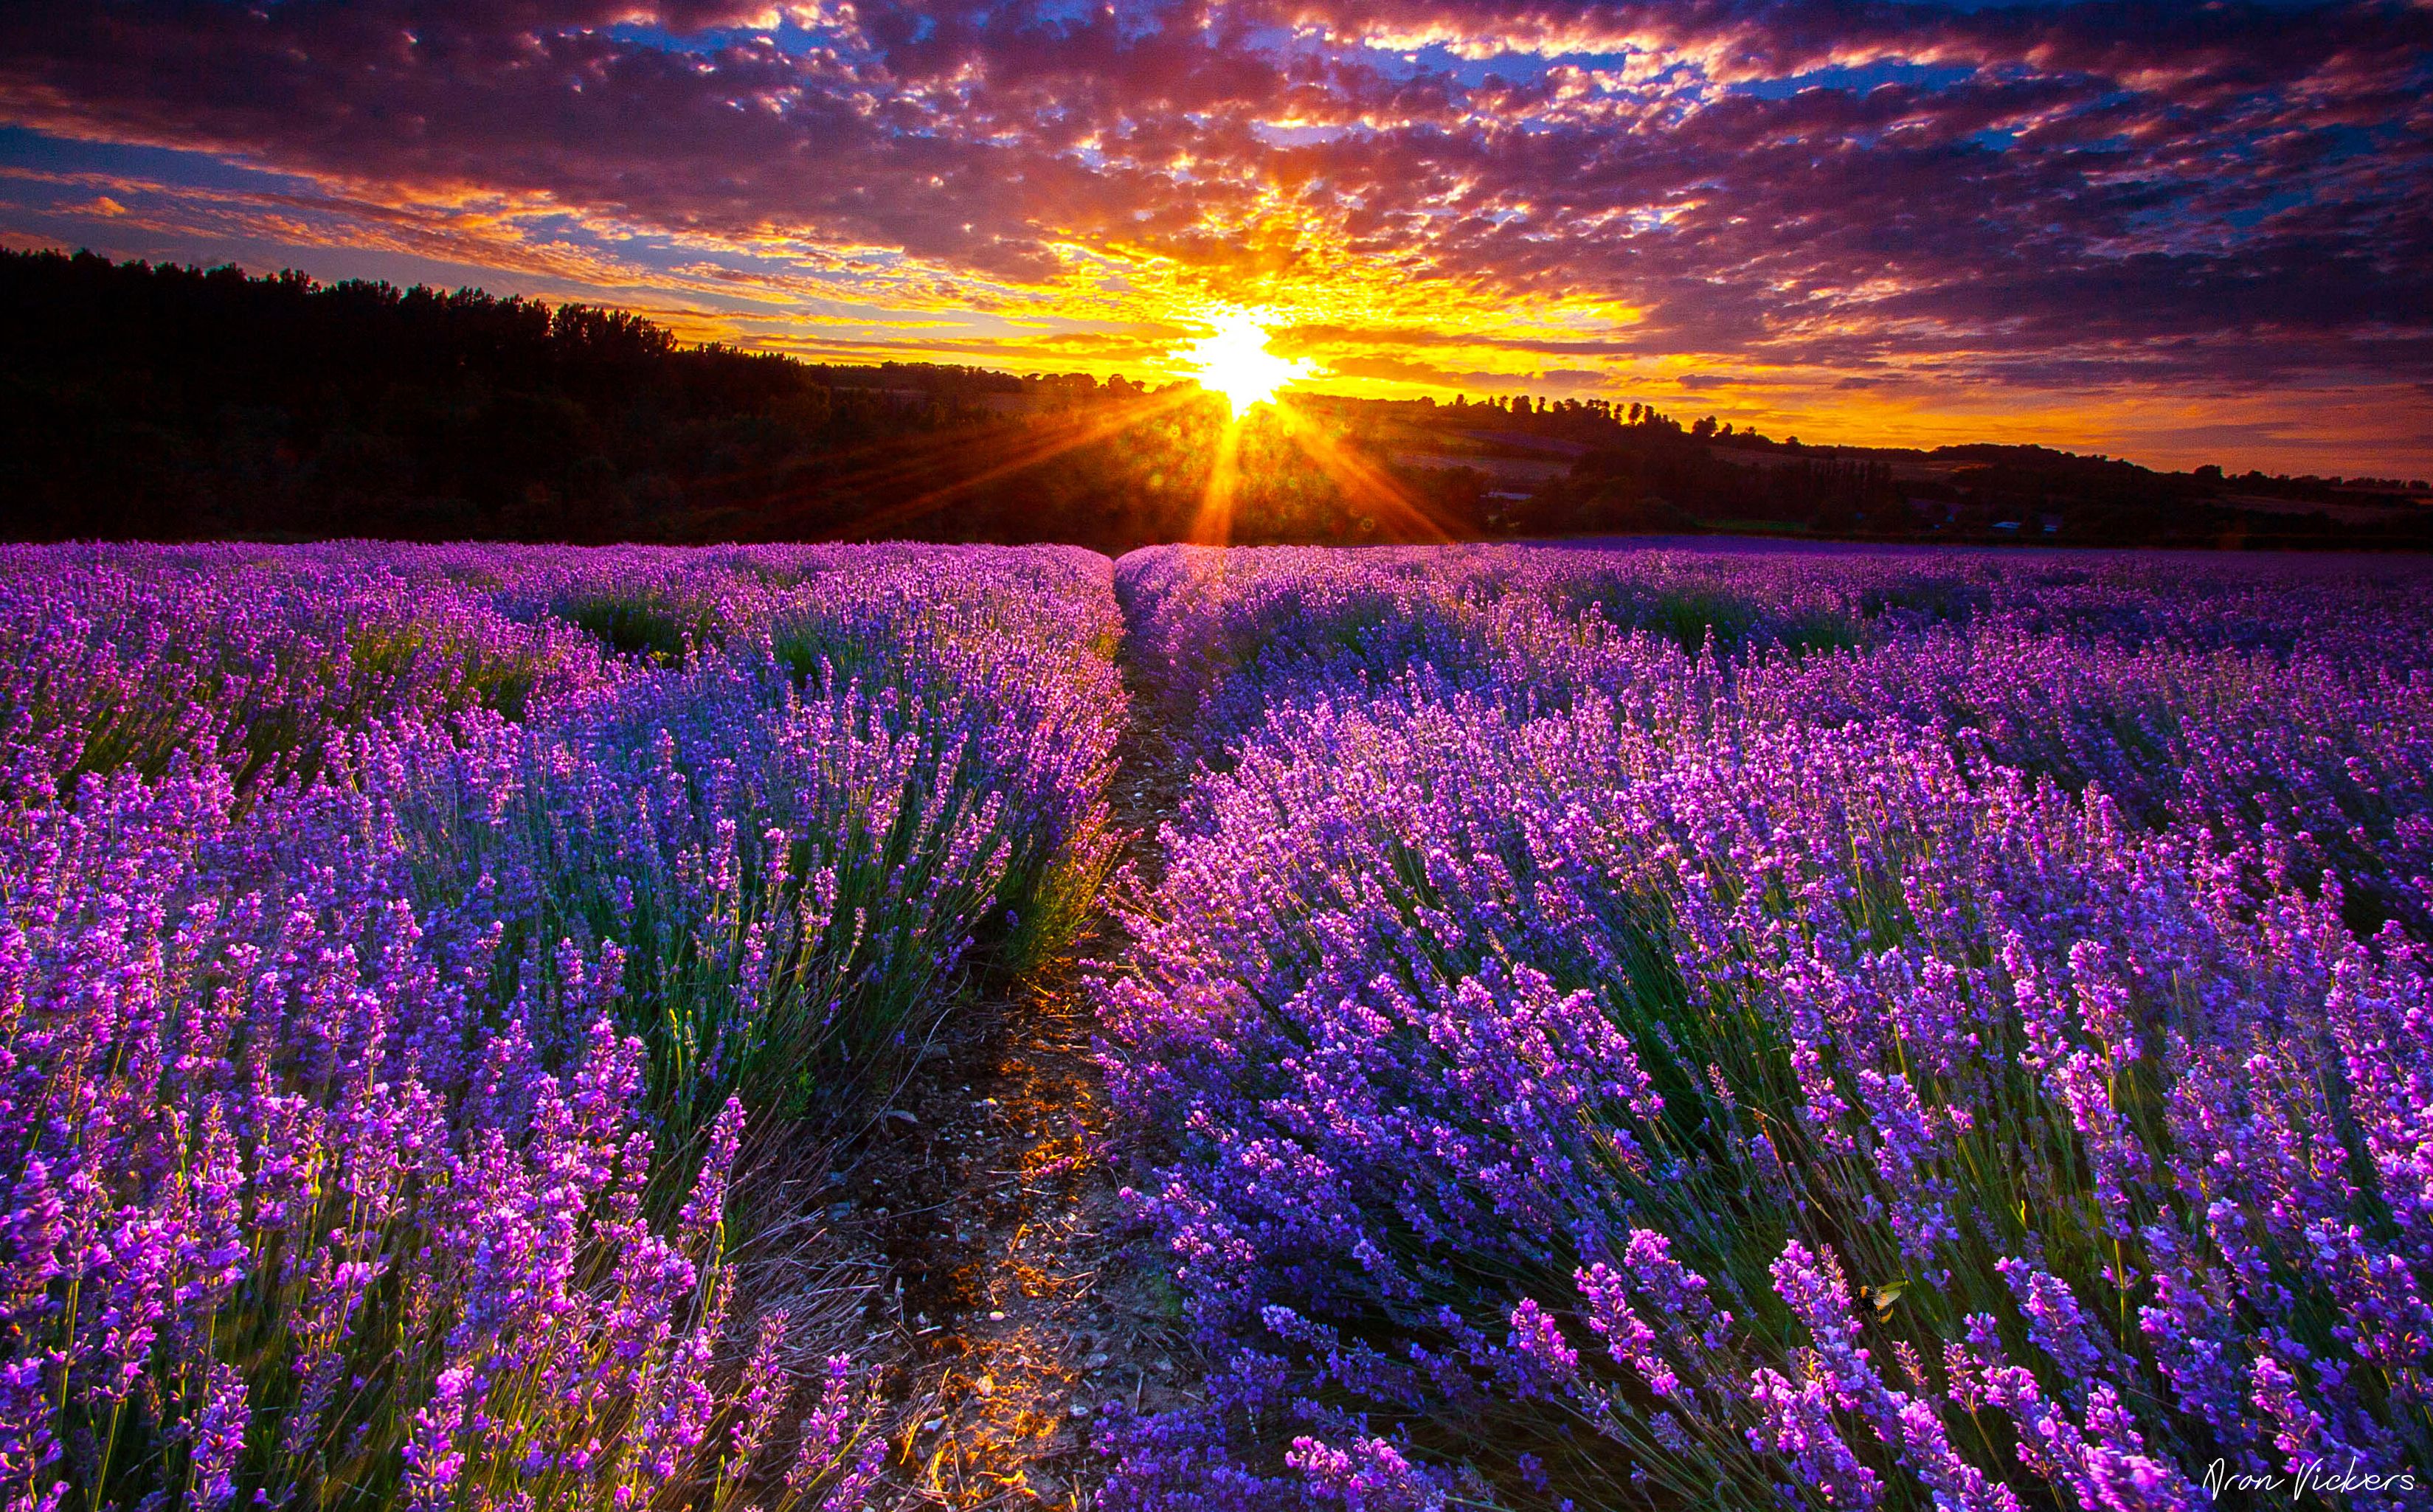 image of Lavender Fields Sunset - #SpaceHero